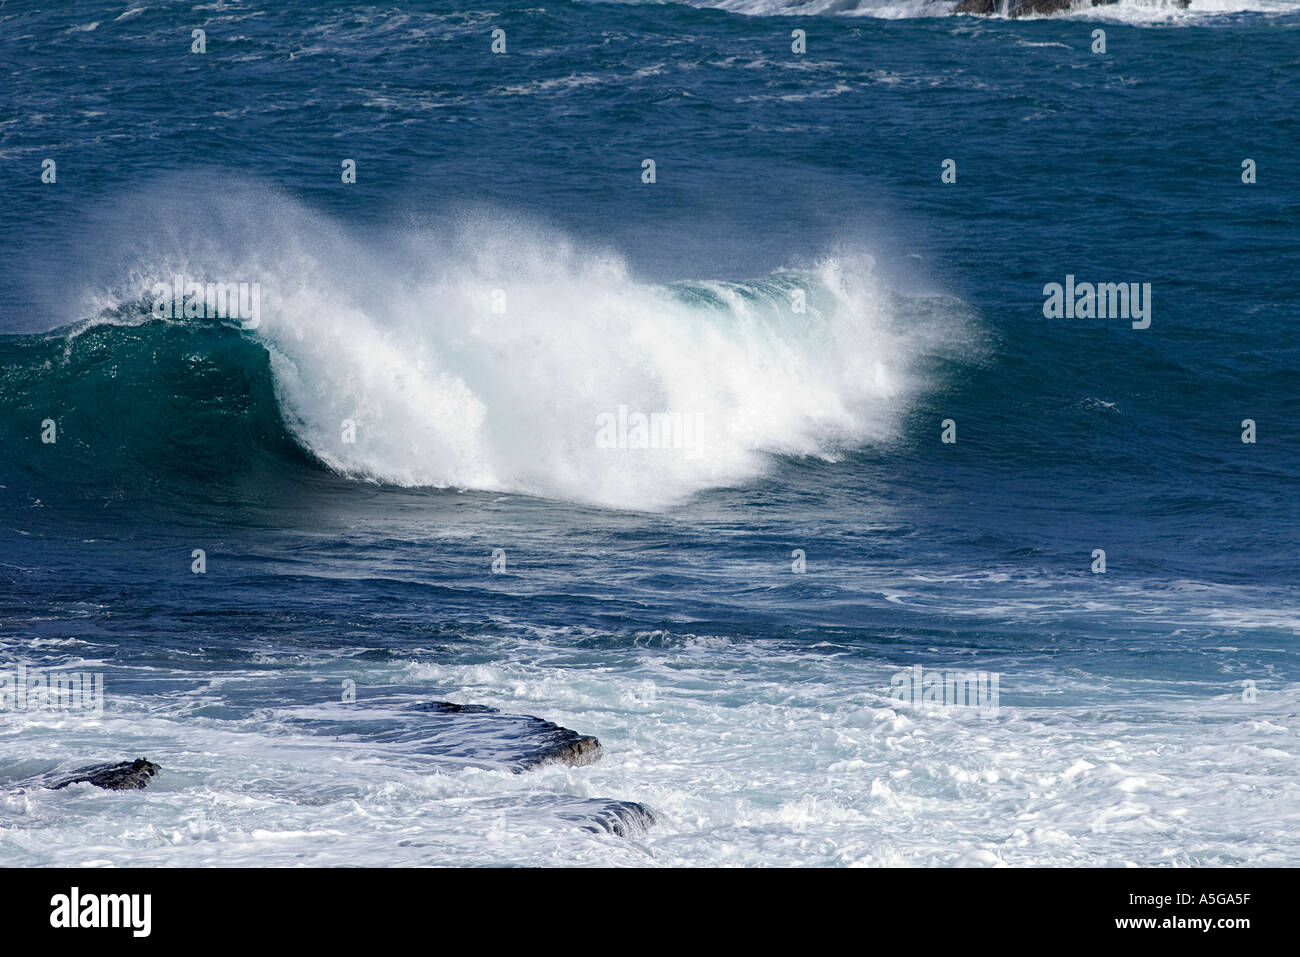 dh North coast BIRSAY ORKNEY Surf sea waves breaking on shore crashing rollers Stock Photo